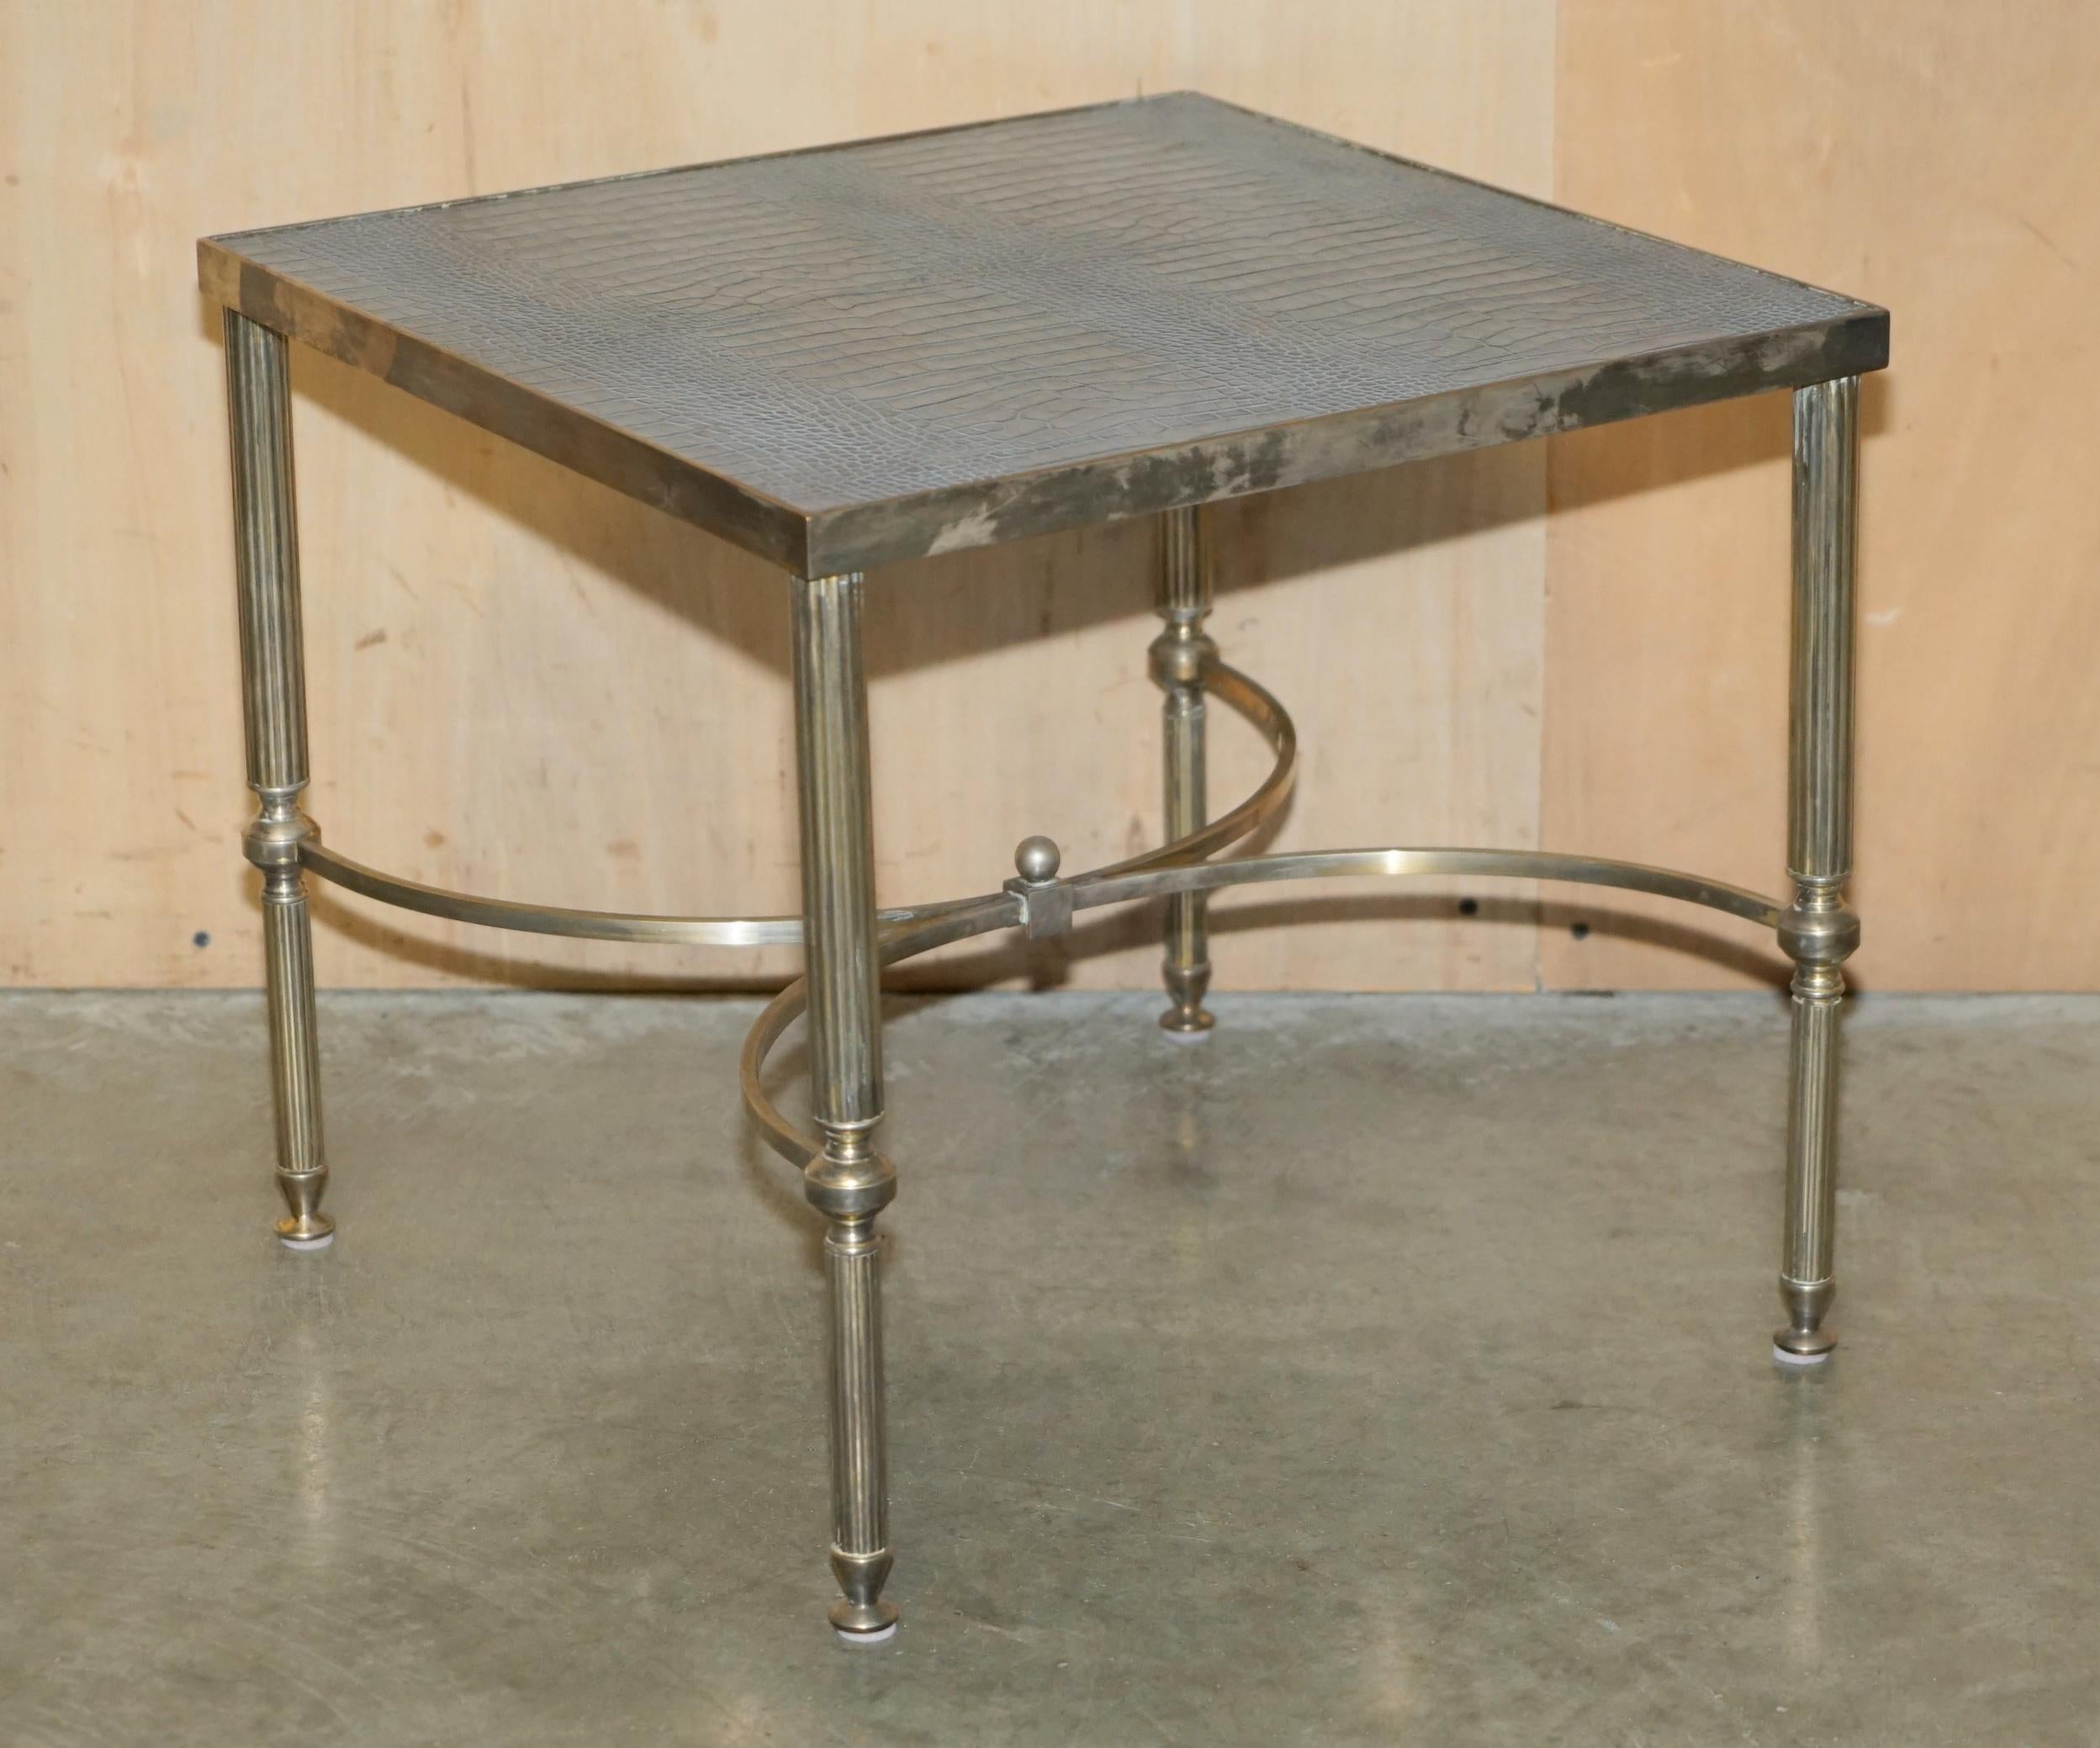 Royal House Antiques

Royal House Antiques is delighted to offer for sale this very collectable paid of vintage mid century nickel plated chrome side tables with crocodile alligator patina leather tops 

Please note the delivery fee listed is just a